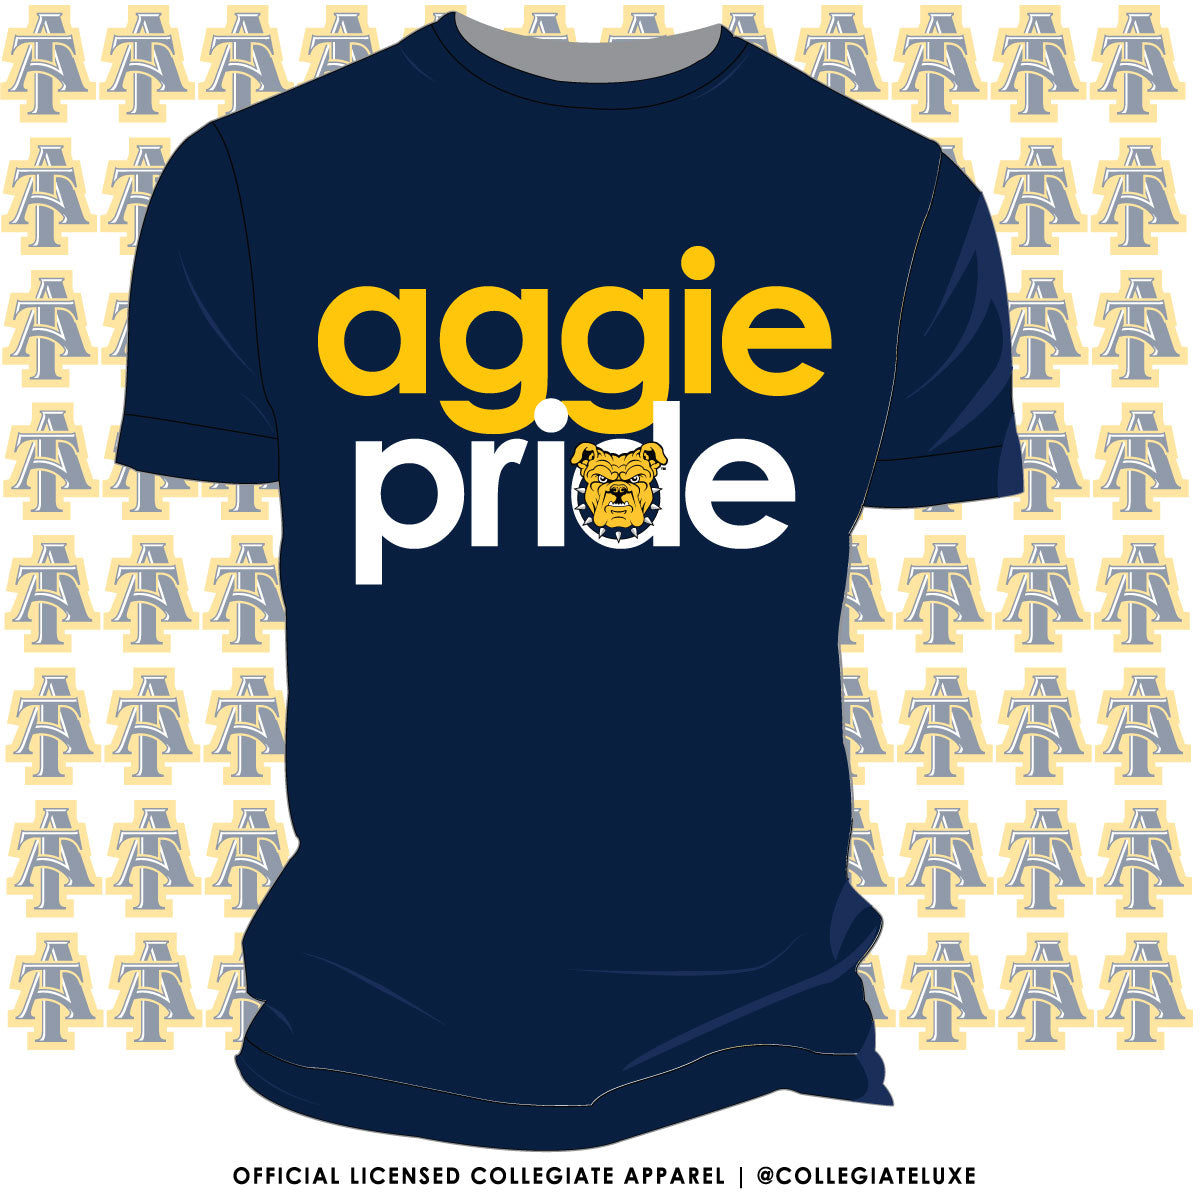 NC A&T AGGIE | 2020 Aggie Pride Navy Unisex Tees (Z)